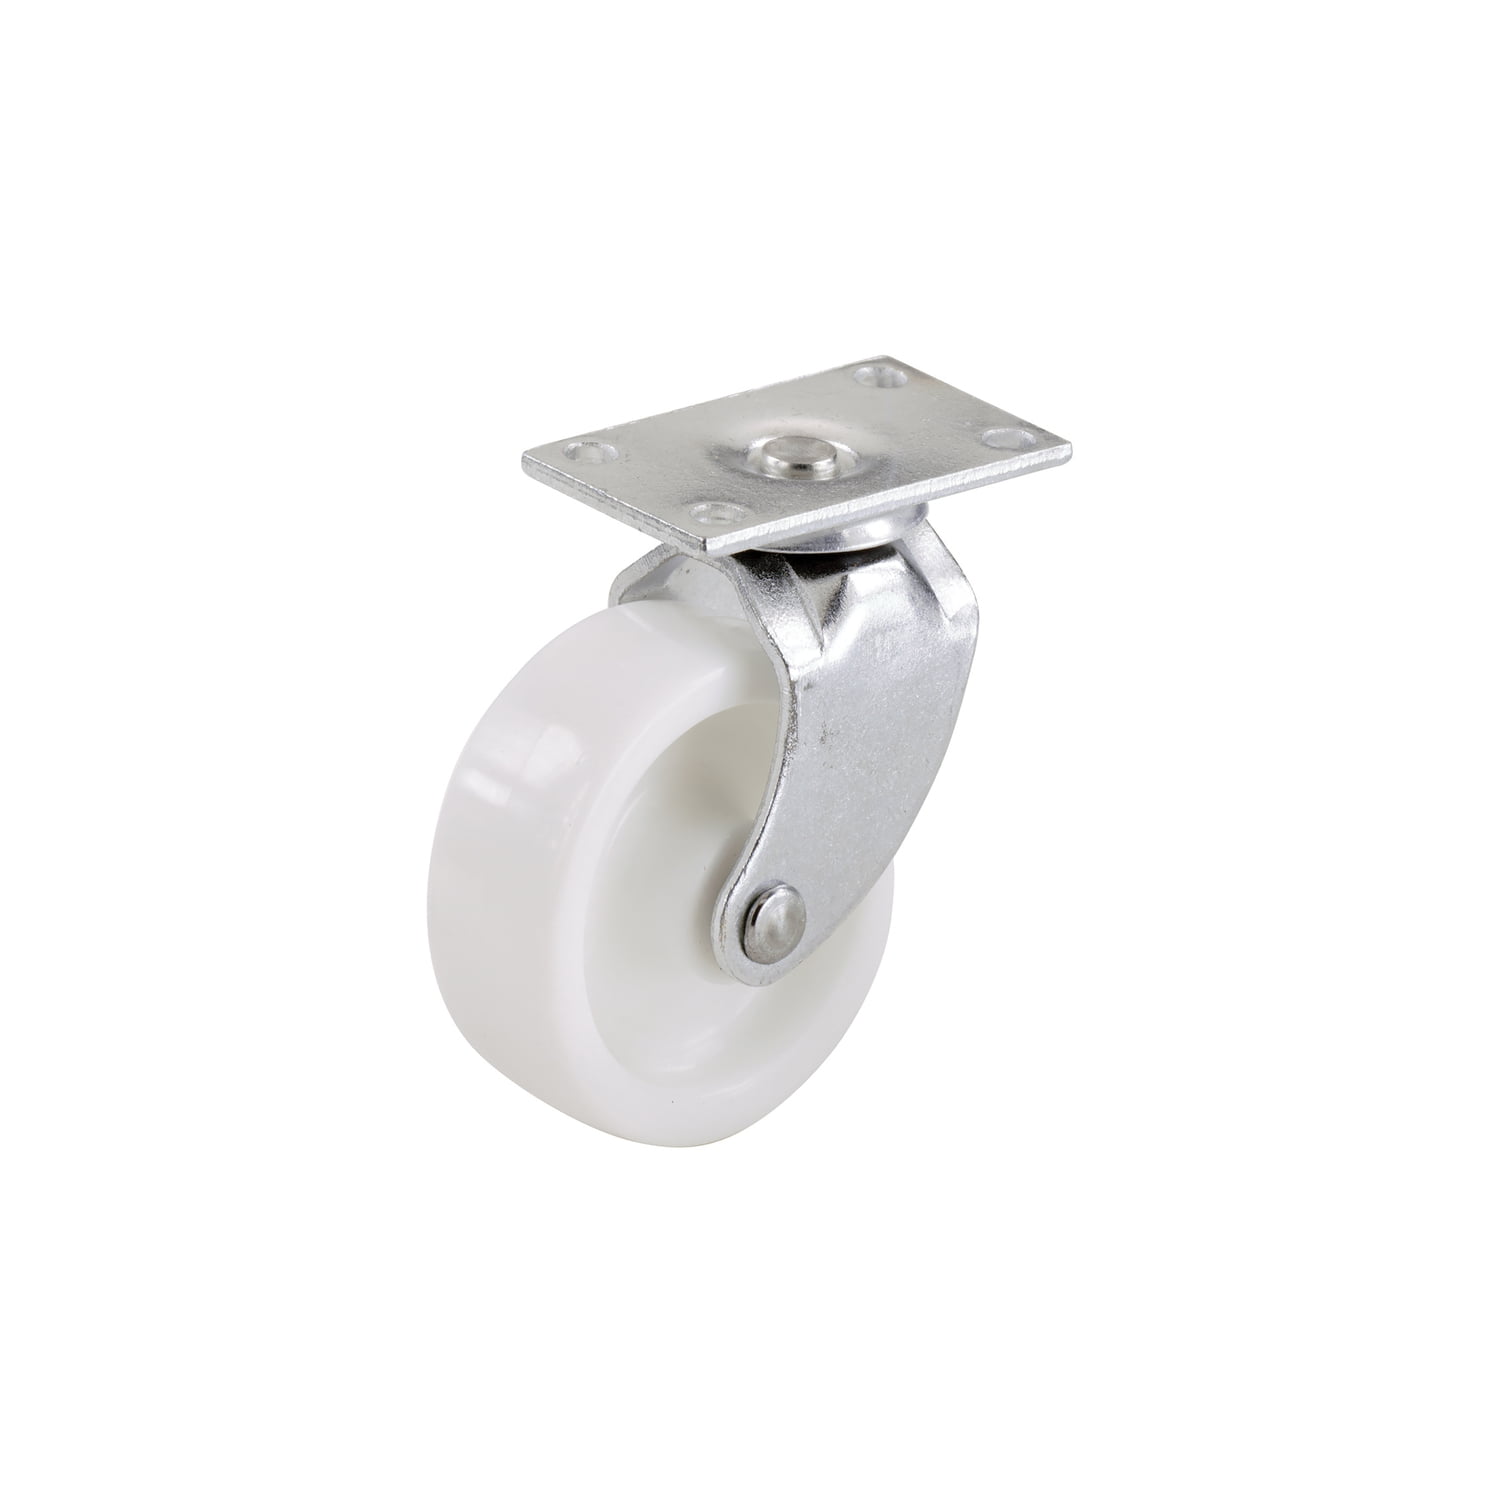 Shepherd Hardware Products 9441 Appliance Caster for sale online 